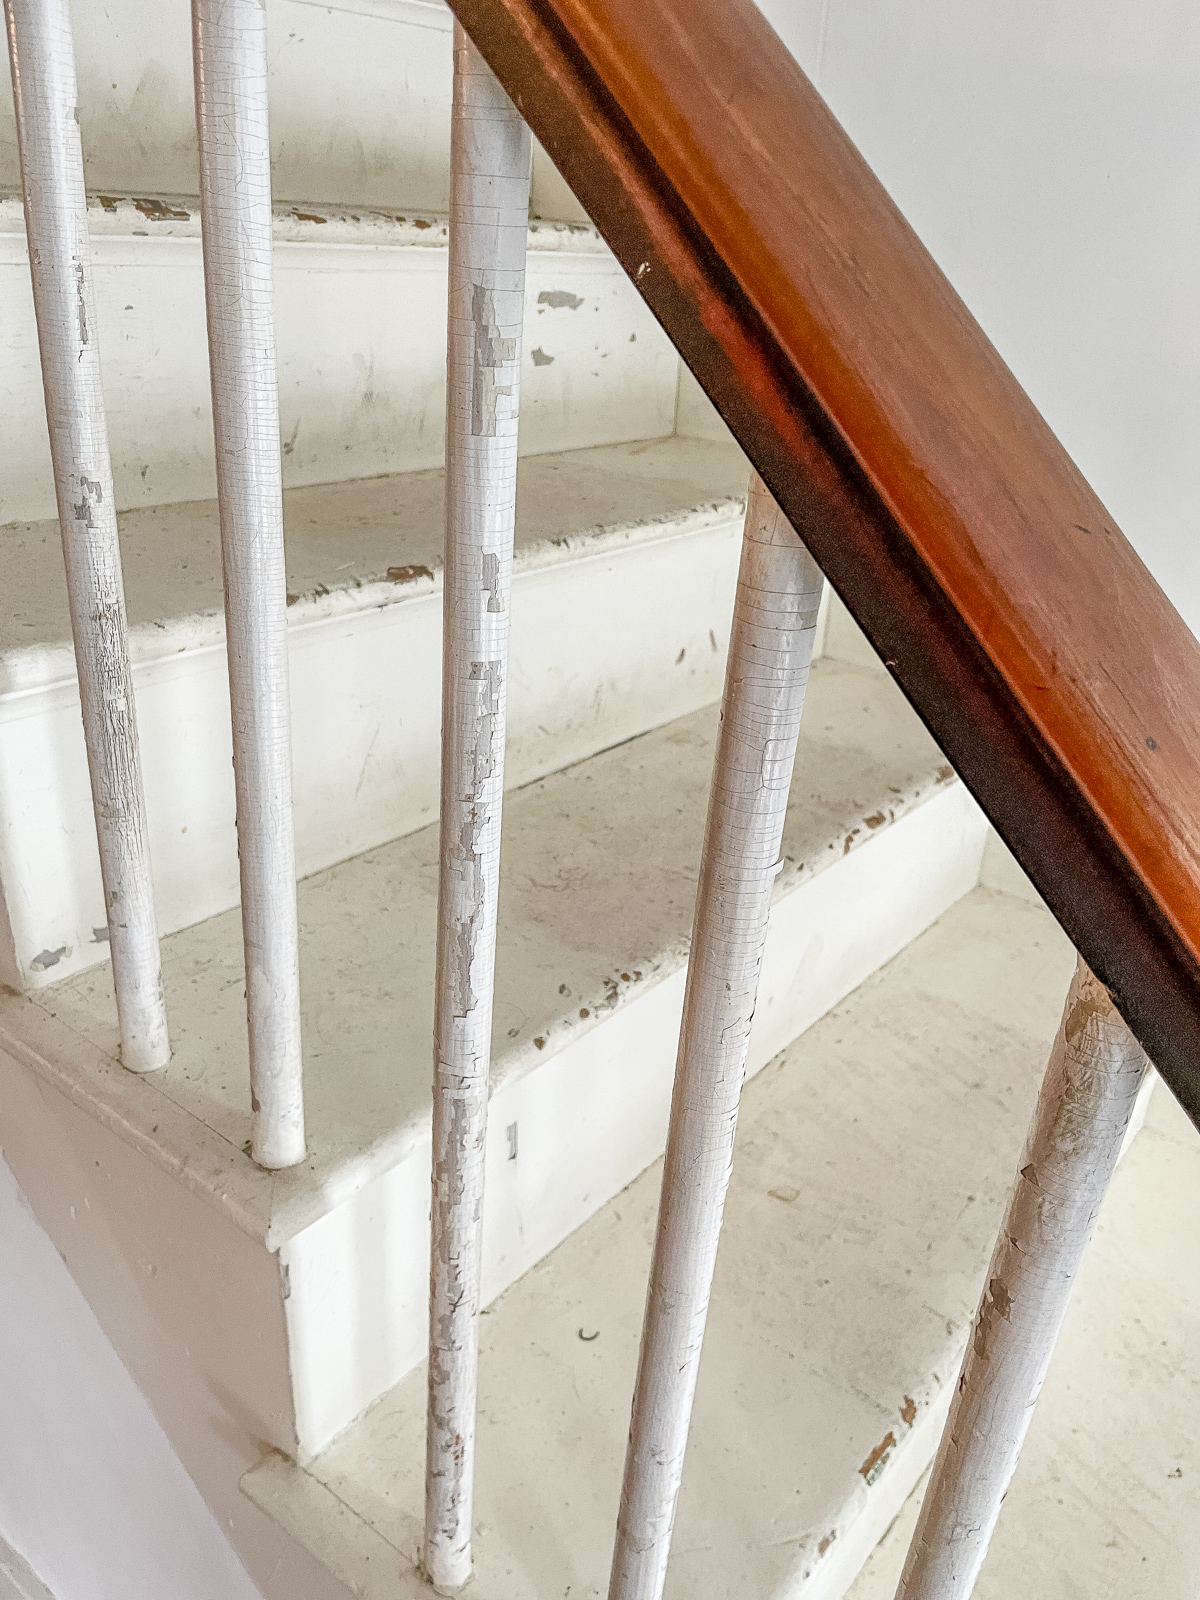 Restoring old stairs